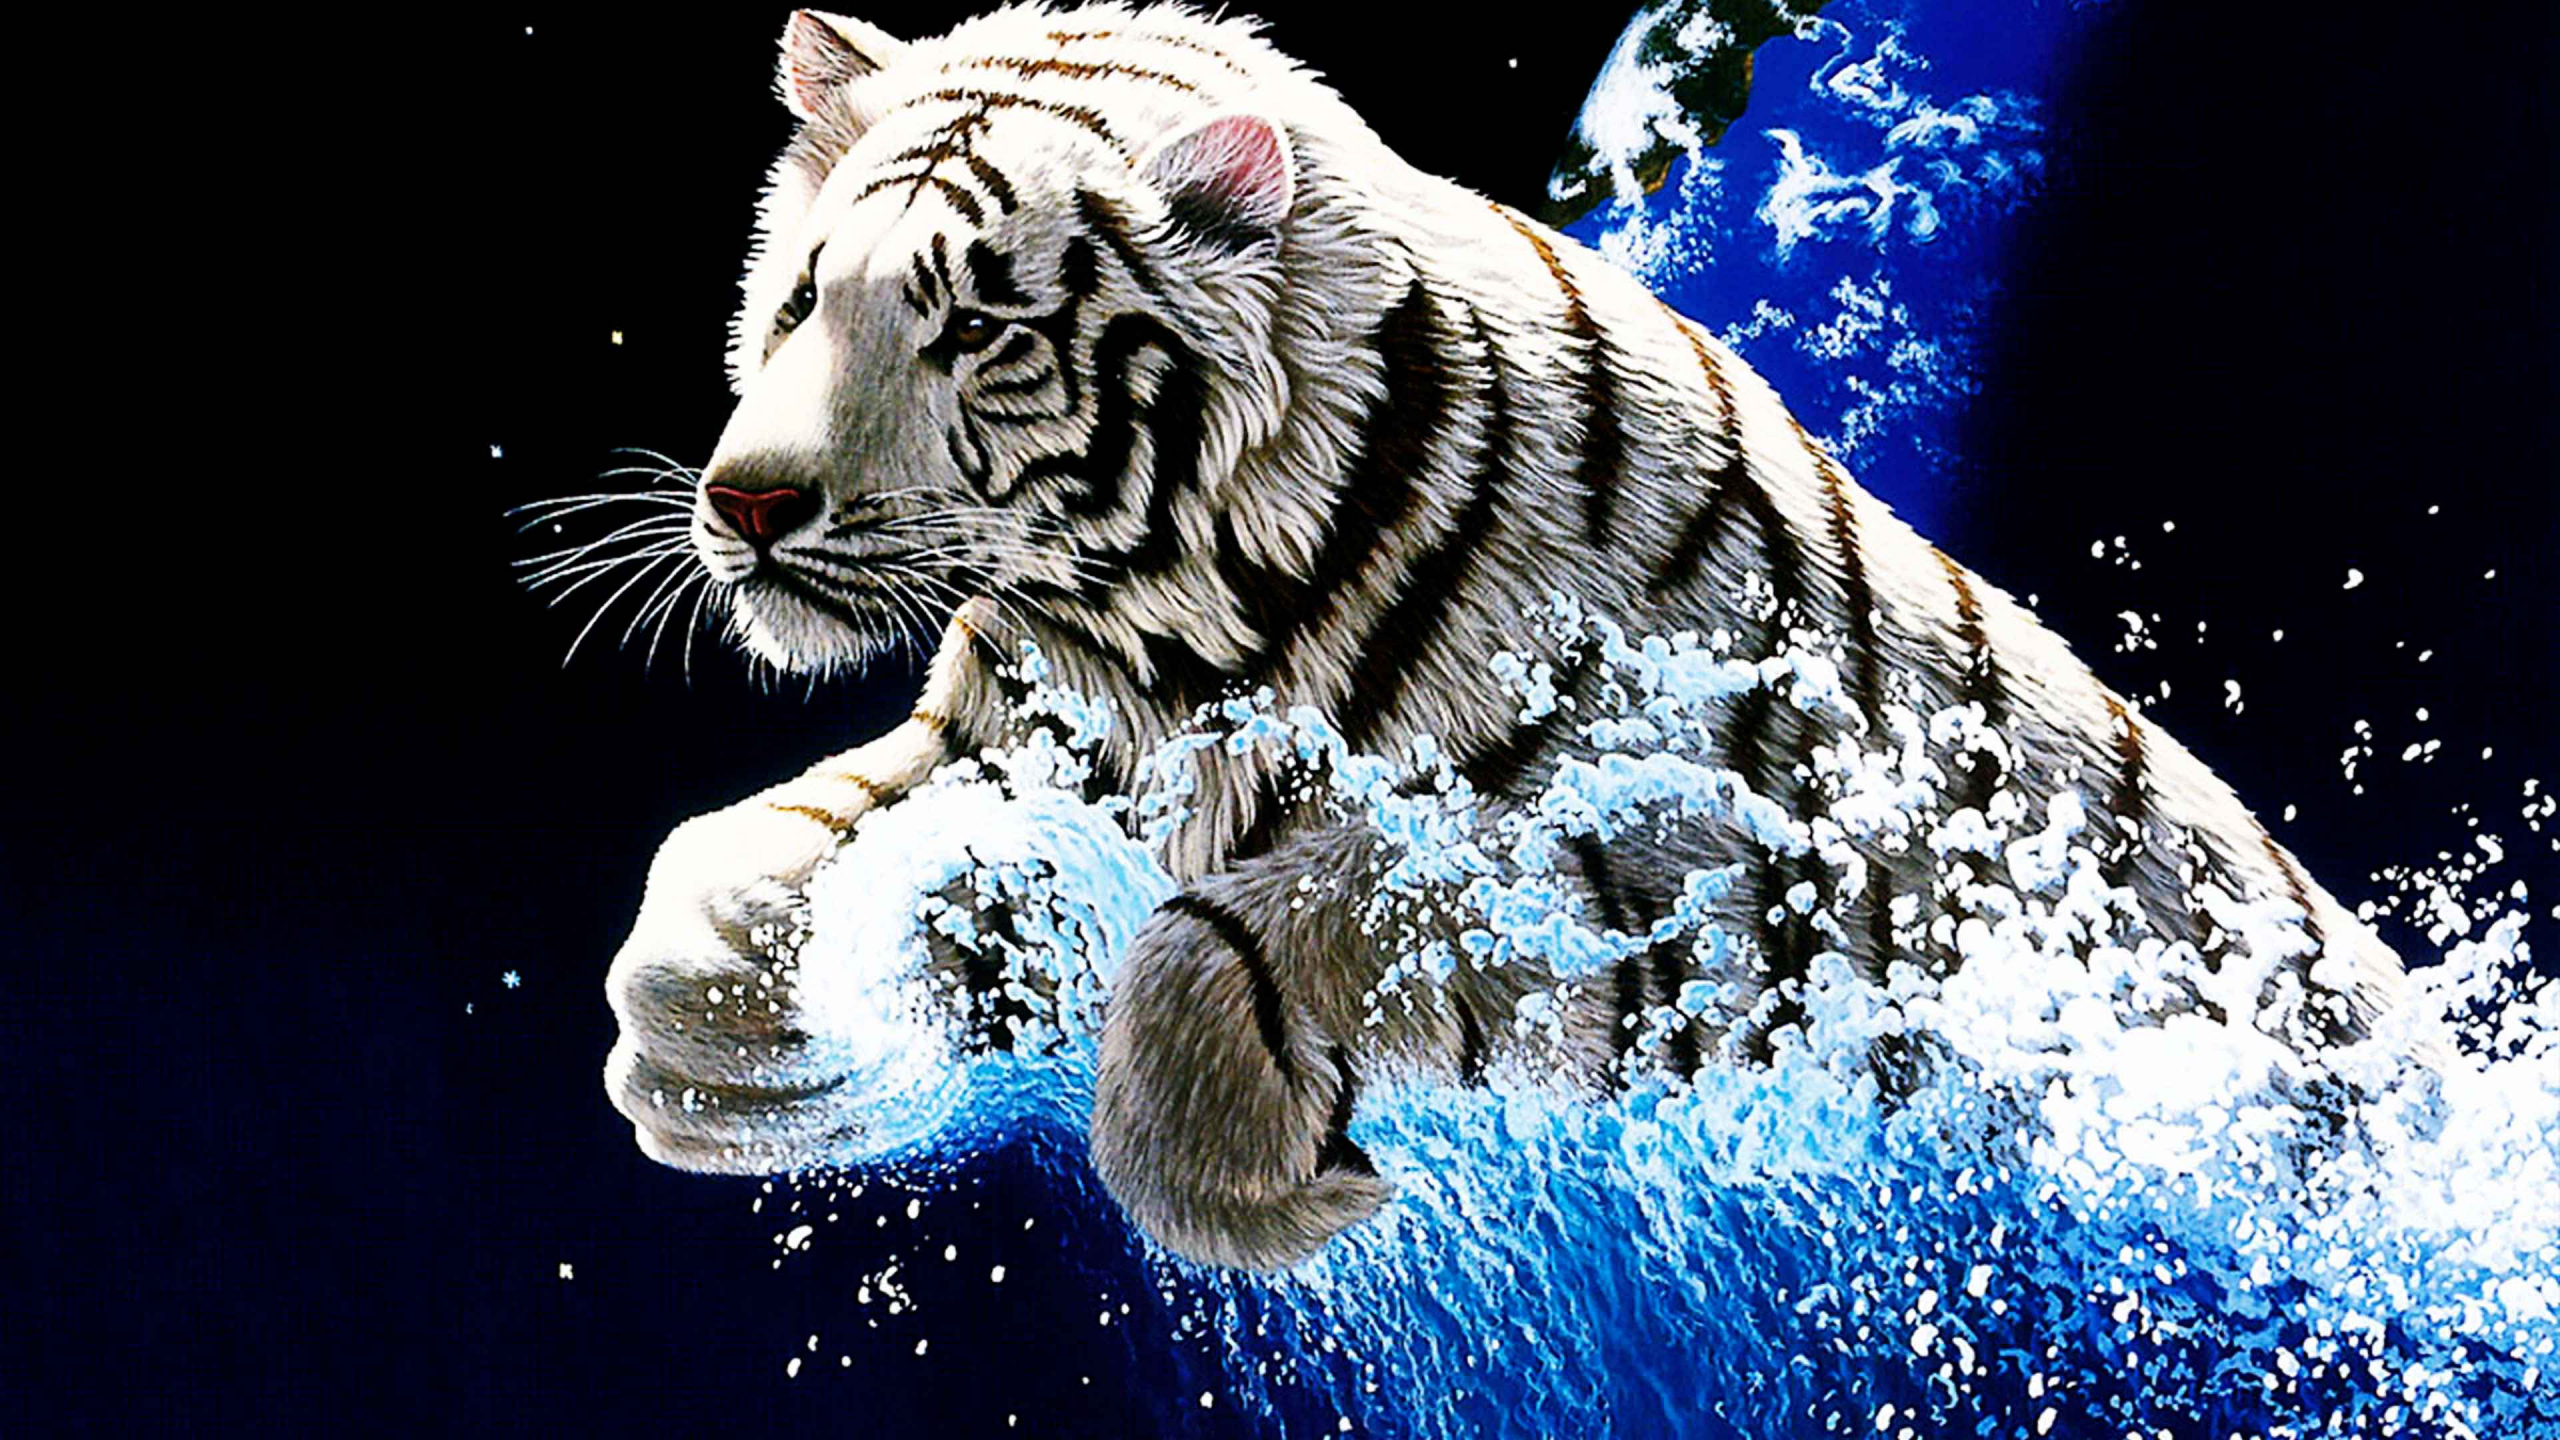 White and Black Tiger in Water. Wallpaper in 2560x1440 Resolution